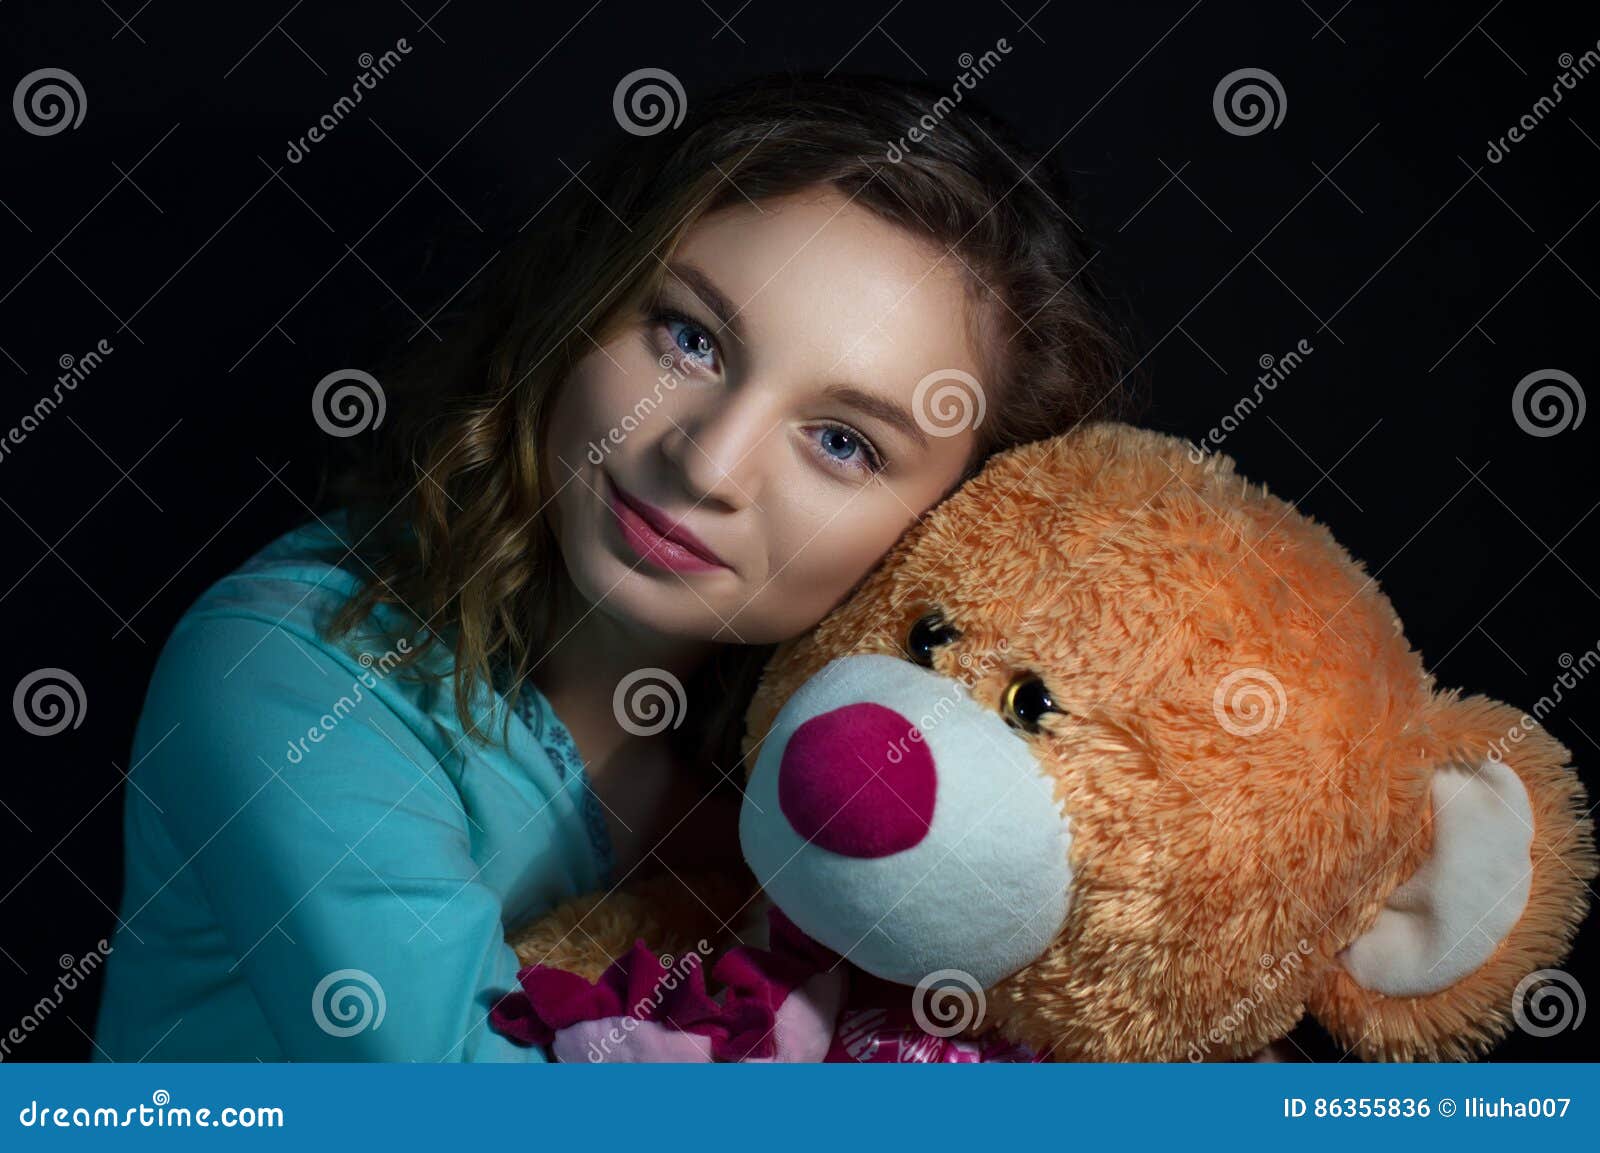 Girl with a Teddy Bear on a Dark Background Stock Photo - Image of ...